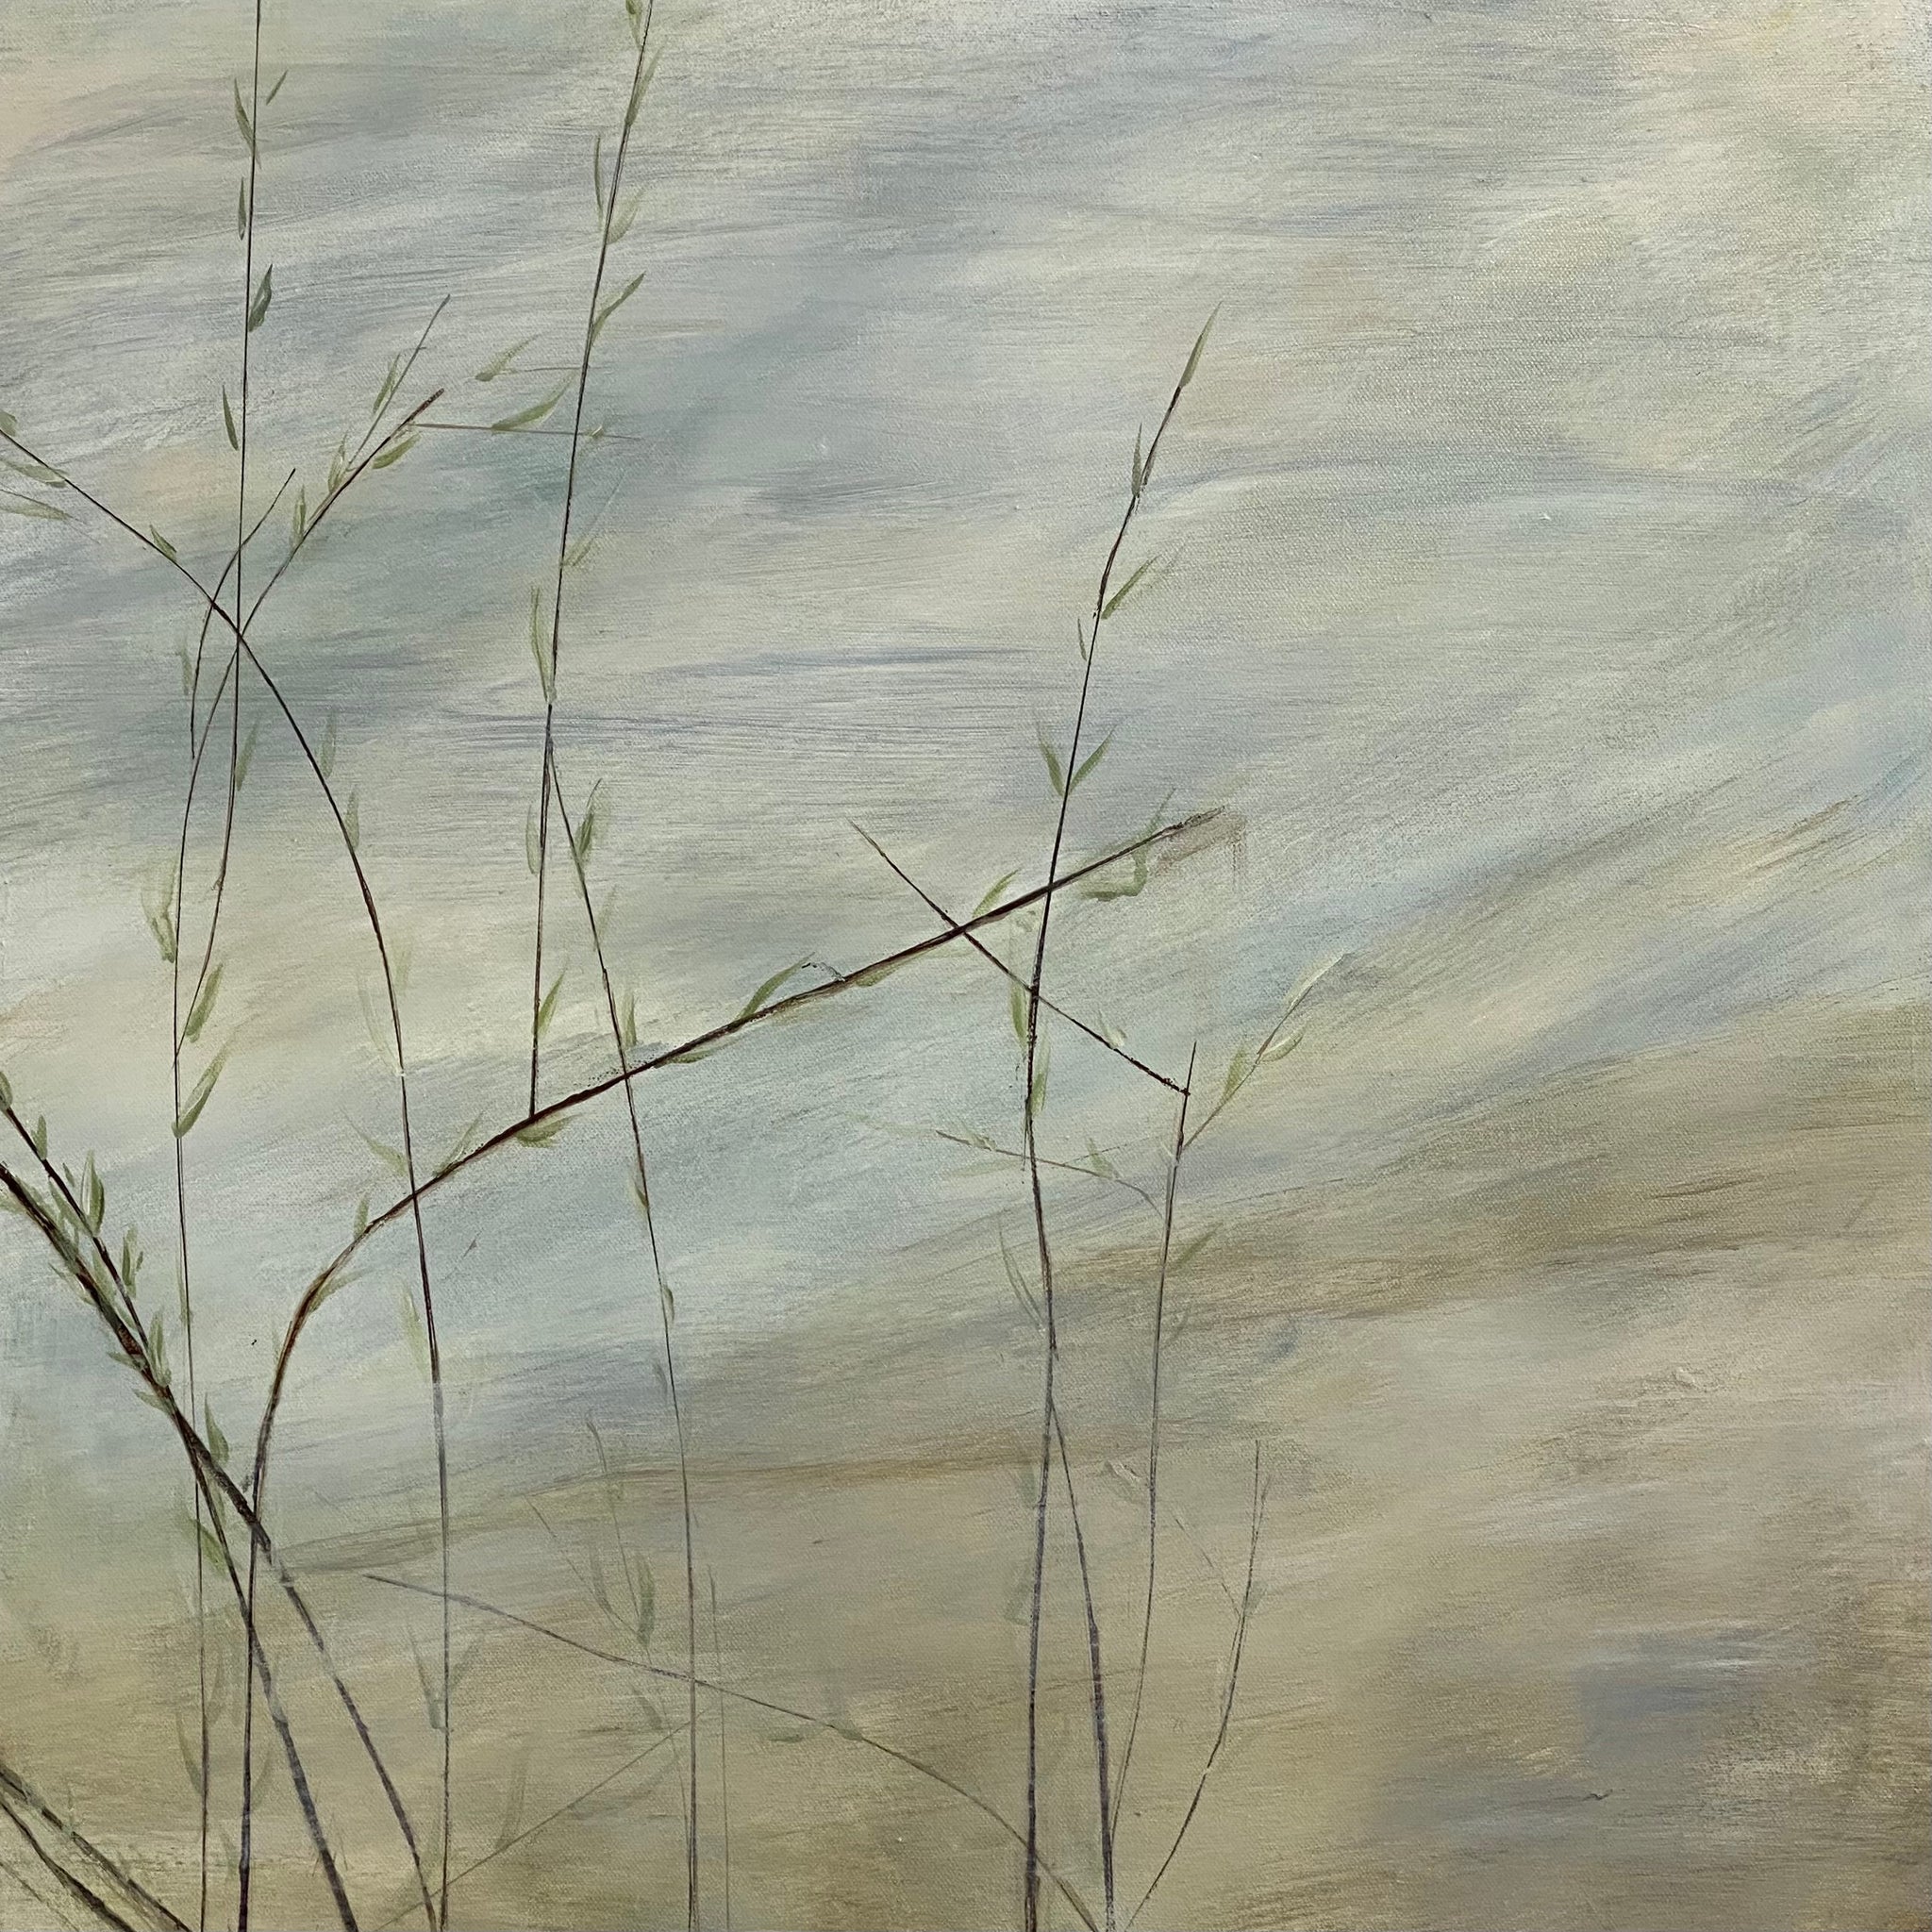 Juanita Bellavance, Pause and focus, From the Chestatee River portfolio, 2021, Acrylic on canvas, 24 x 24 inches.